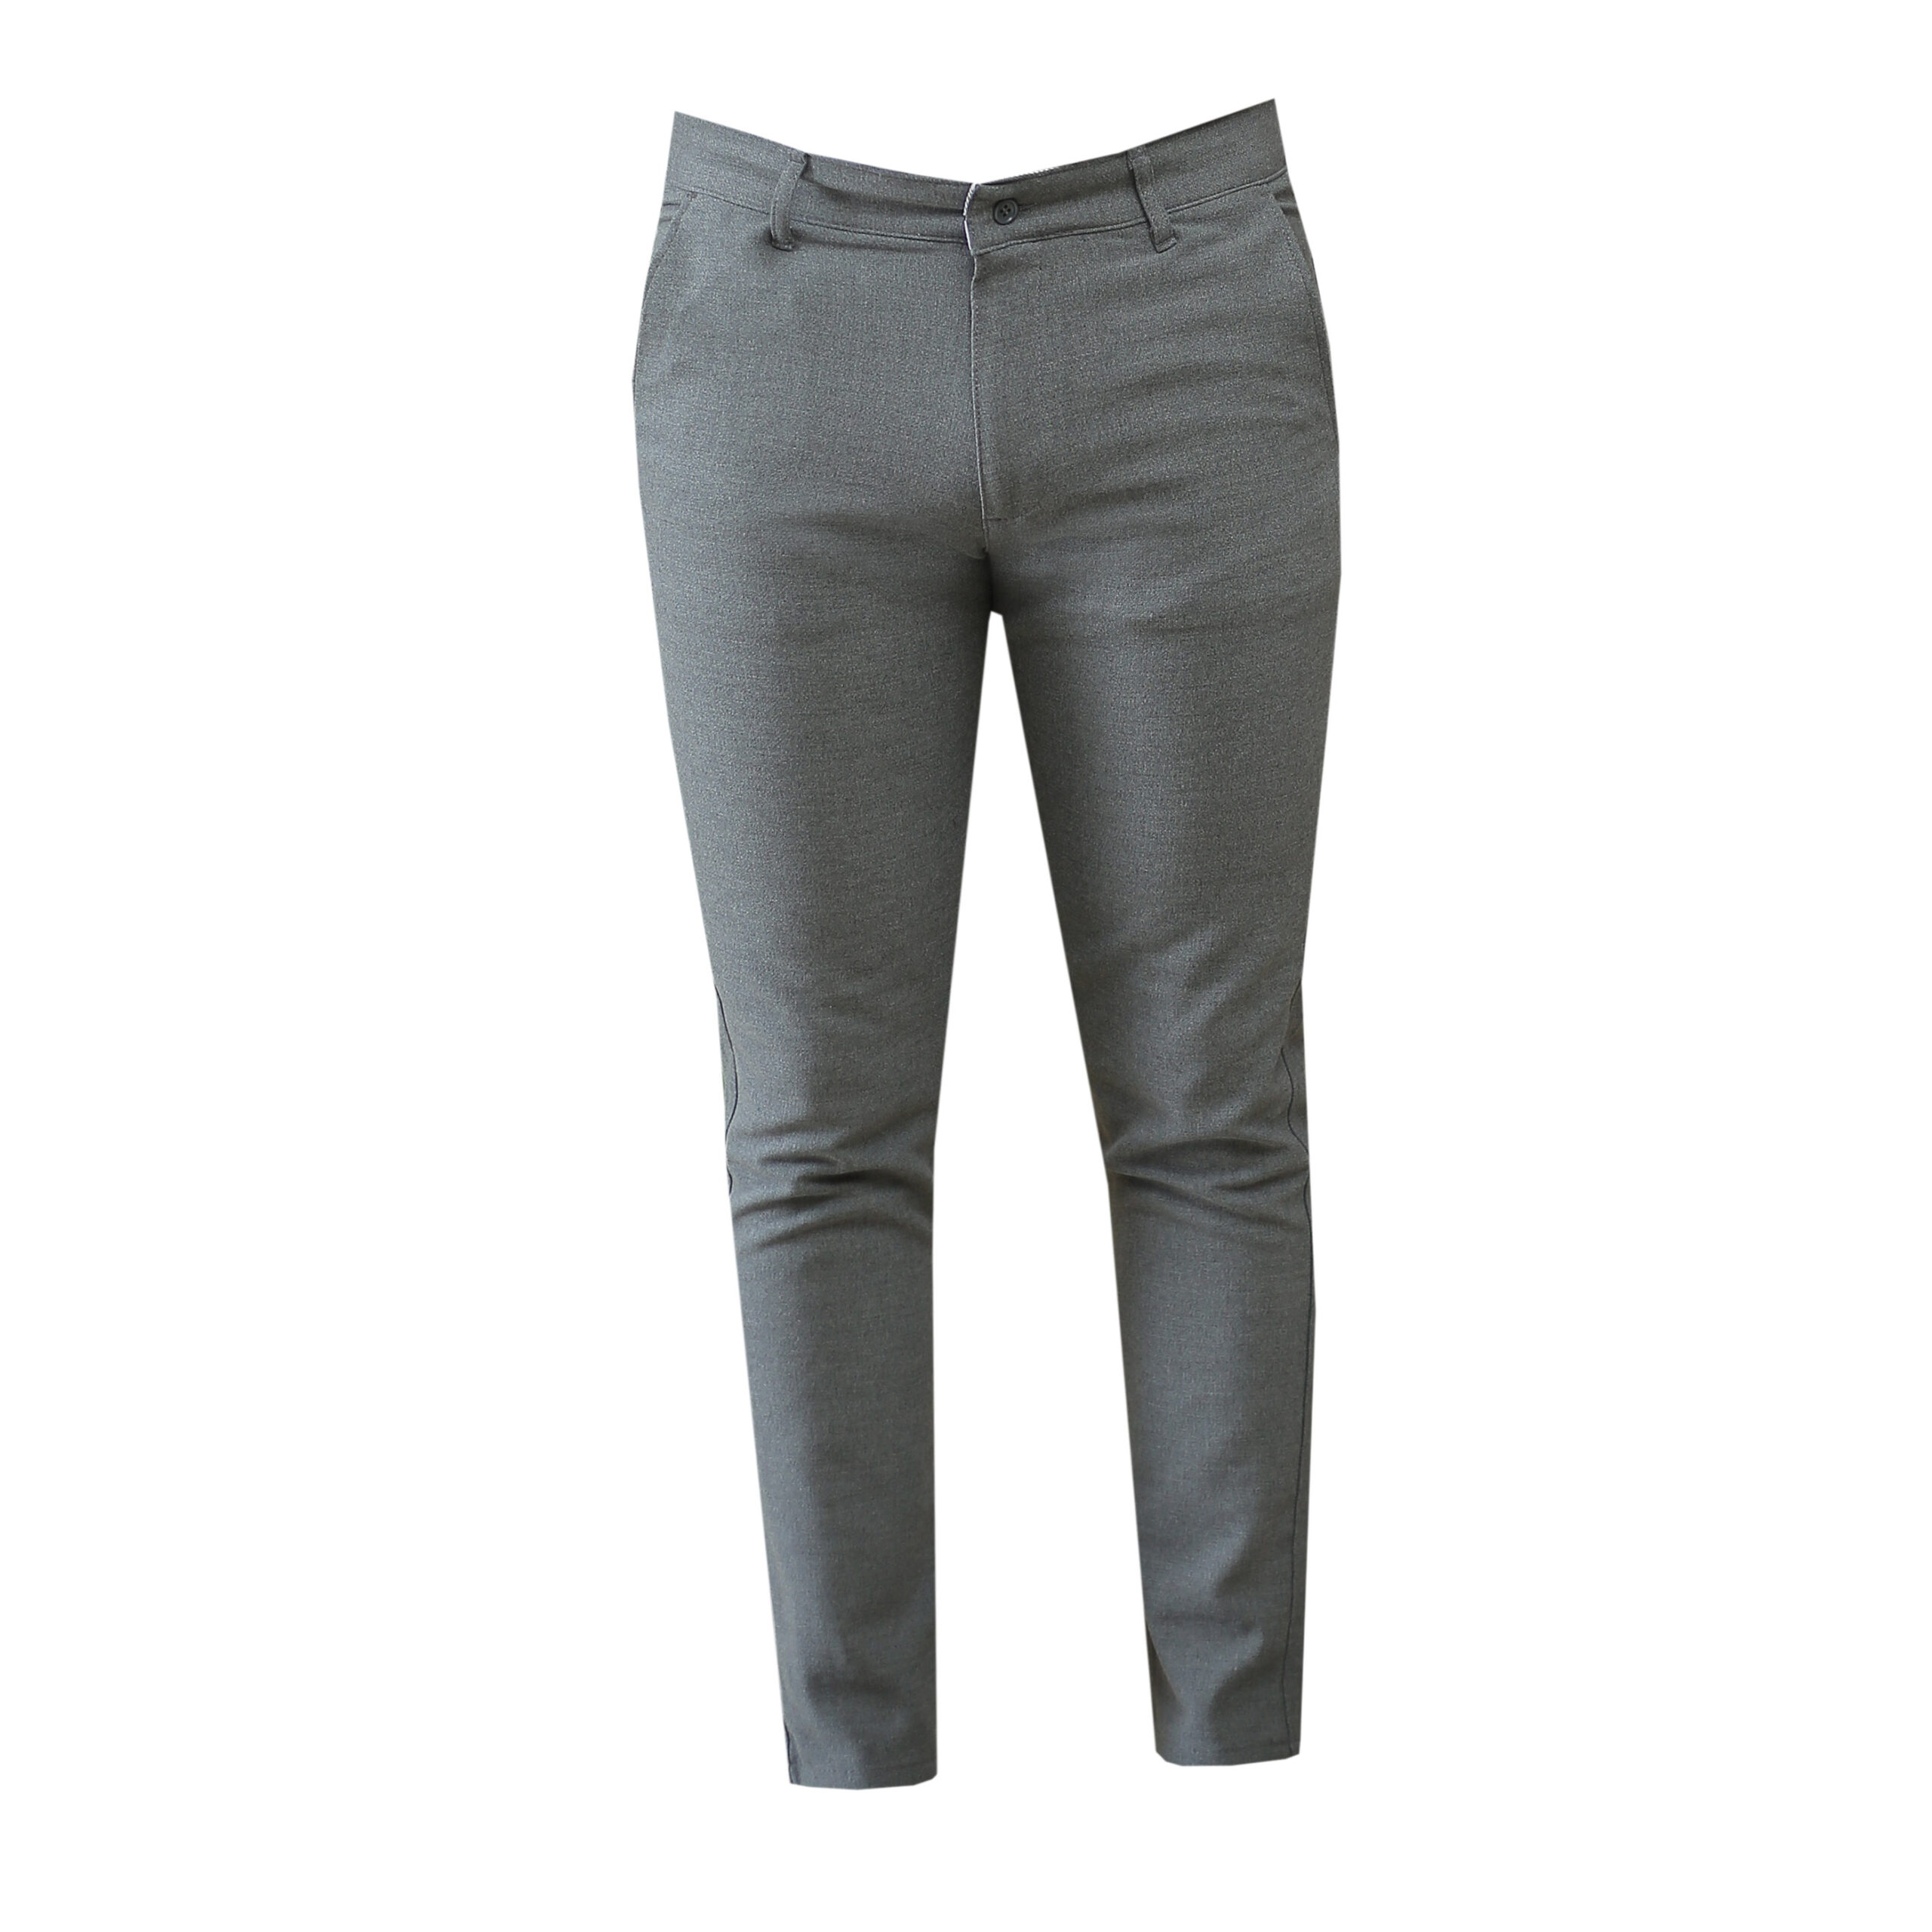 Casual Pants for Men - Chino Type